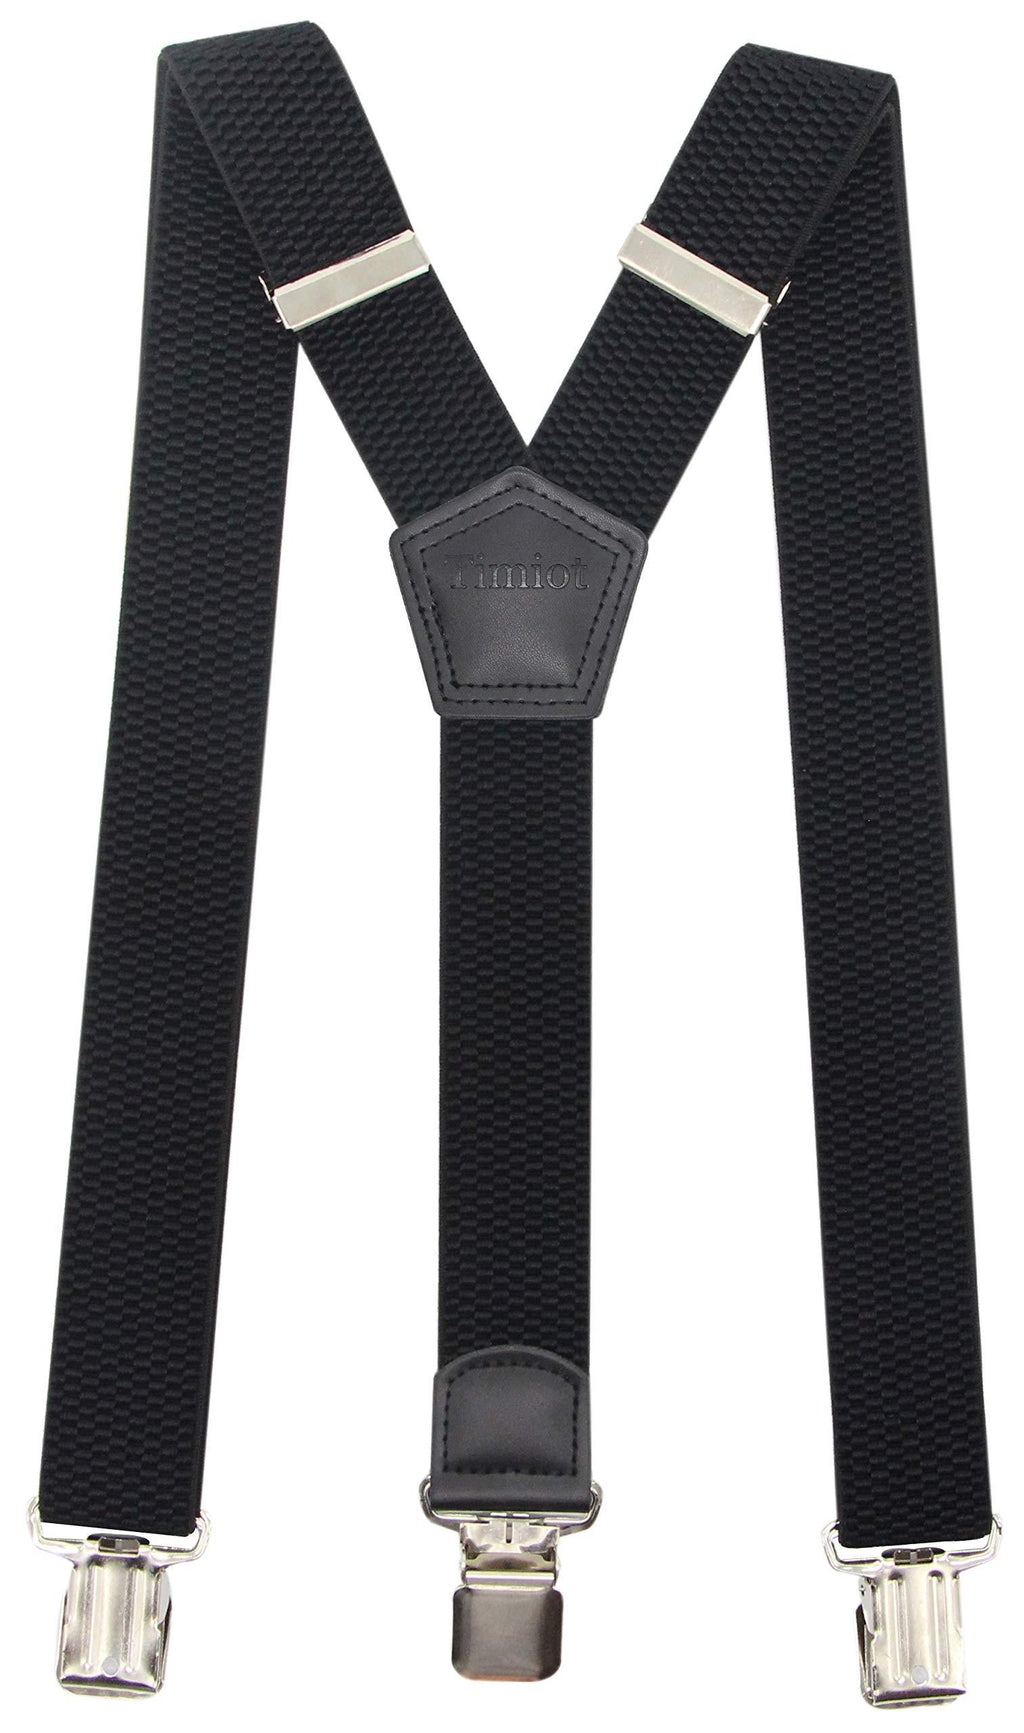 [Australia] - Premium Men's Y-Back Suspenders Stretch Perfect 1.5" Width for Work Style Formal Strong Heavy Duty Clips Black 